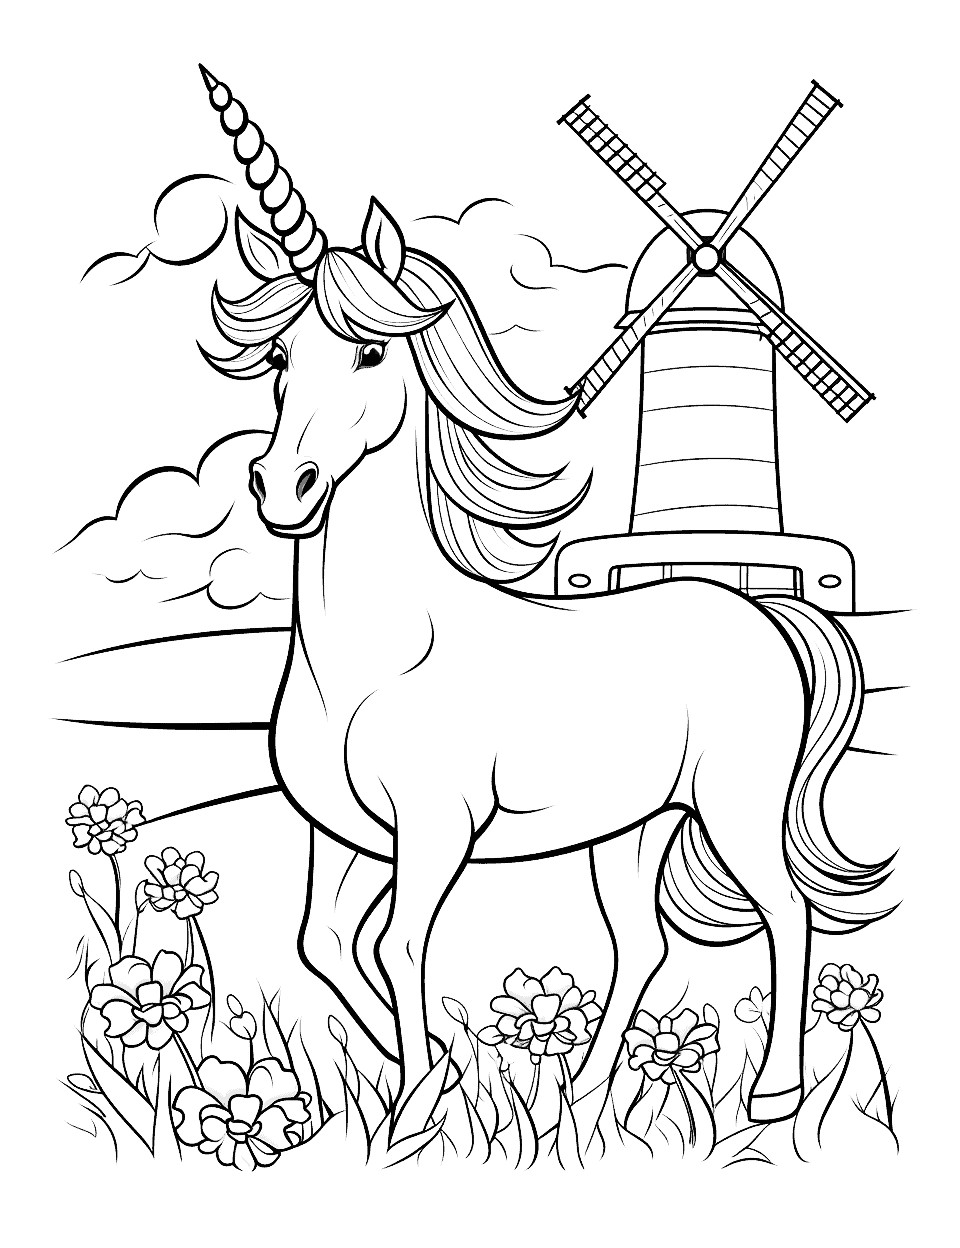 Unicorn and Windmills Coloring Page - A unicorn in a Dutch setting, surrounded by tulips and windmills.